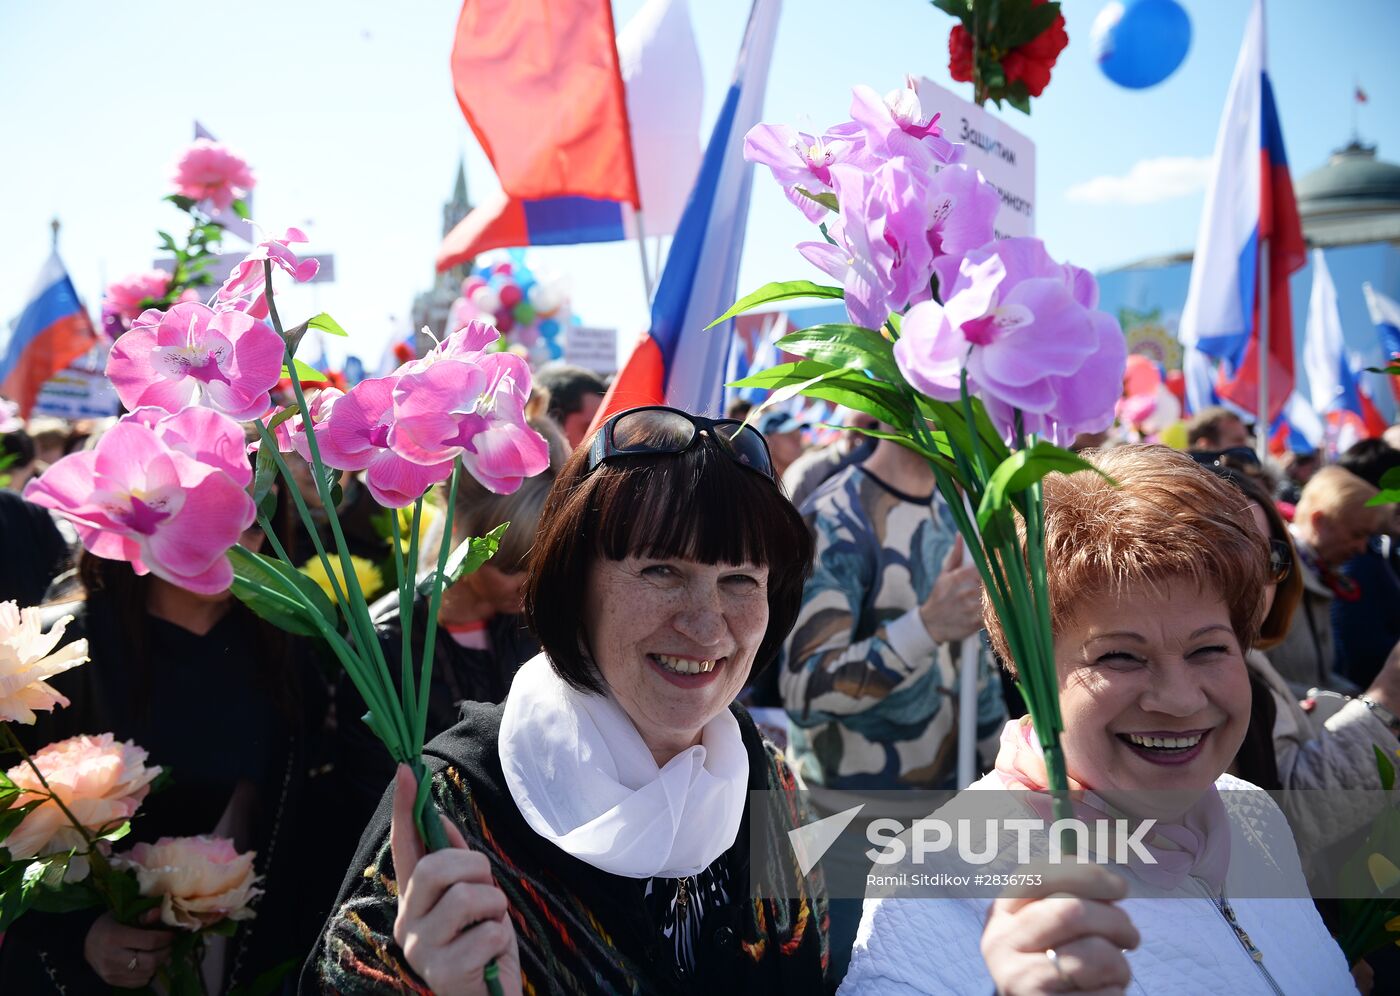 May 1 demonstration on Red Square